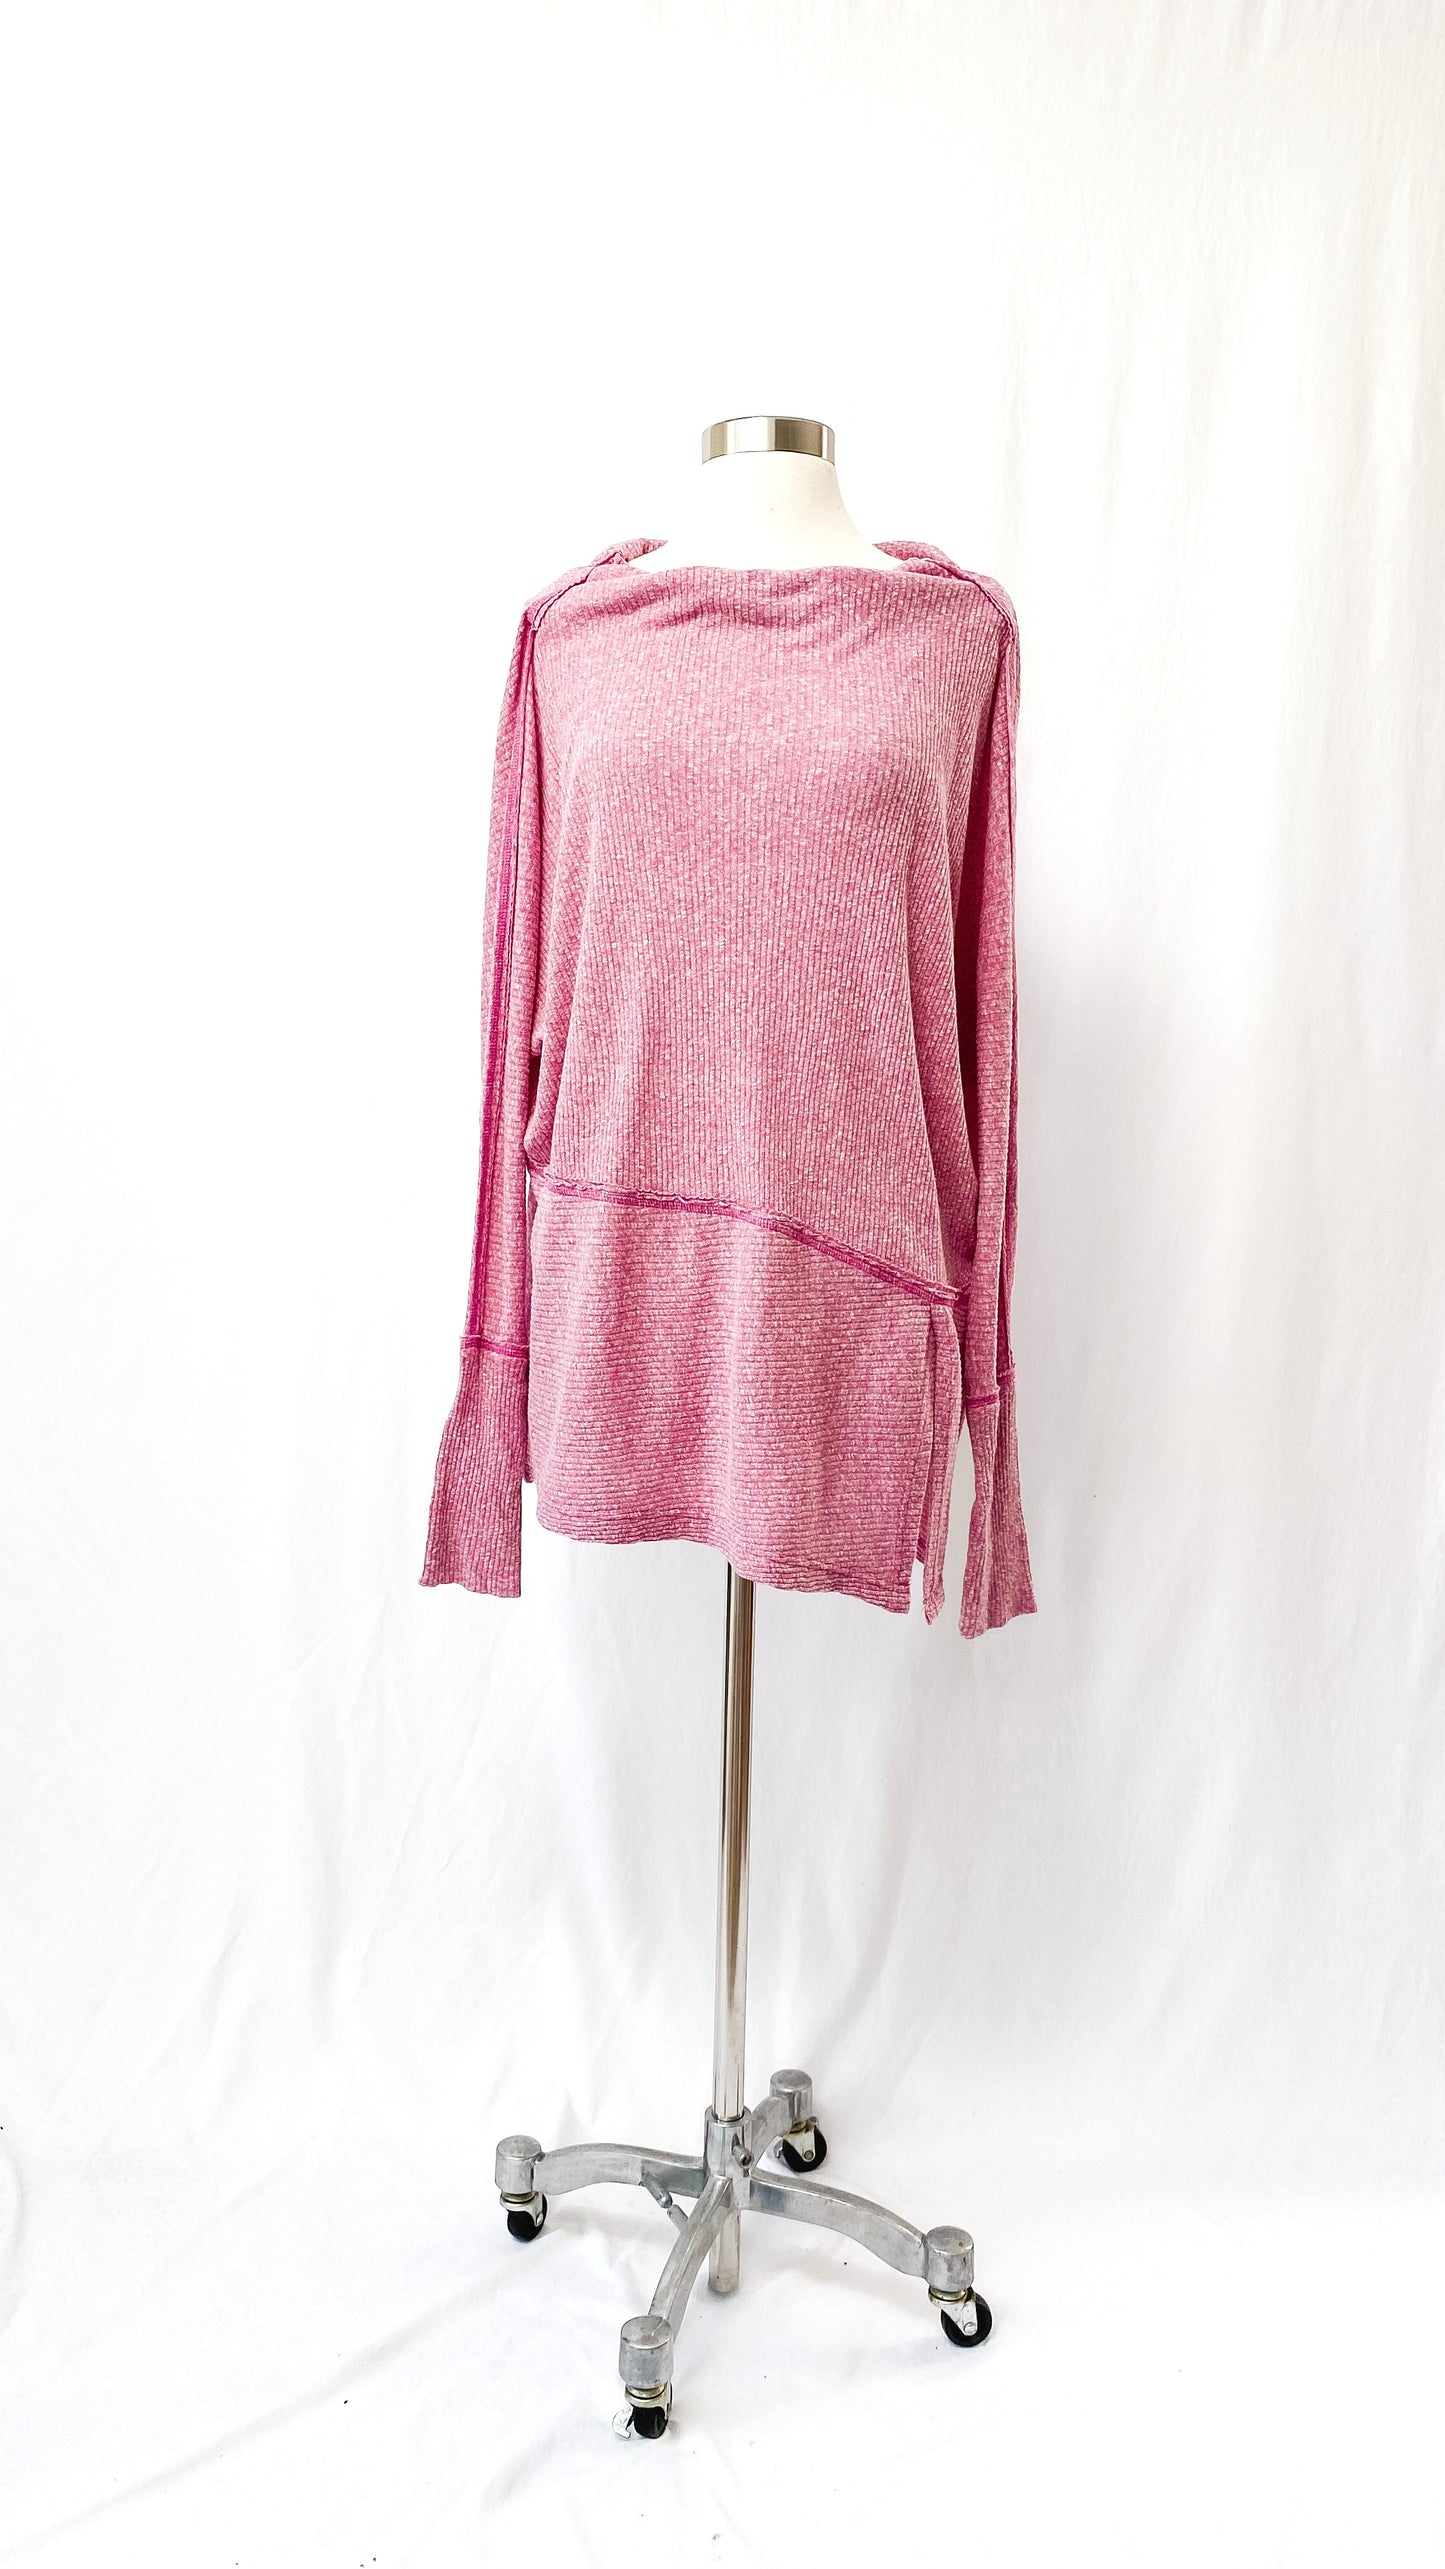 We The Free 'Londontown' Ribbed Top in Light Pink (S)